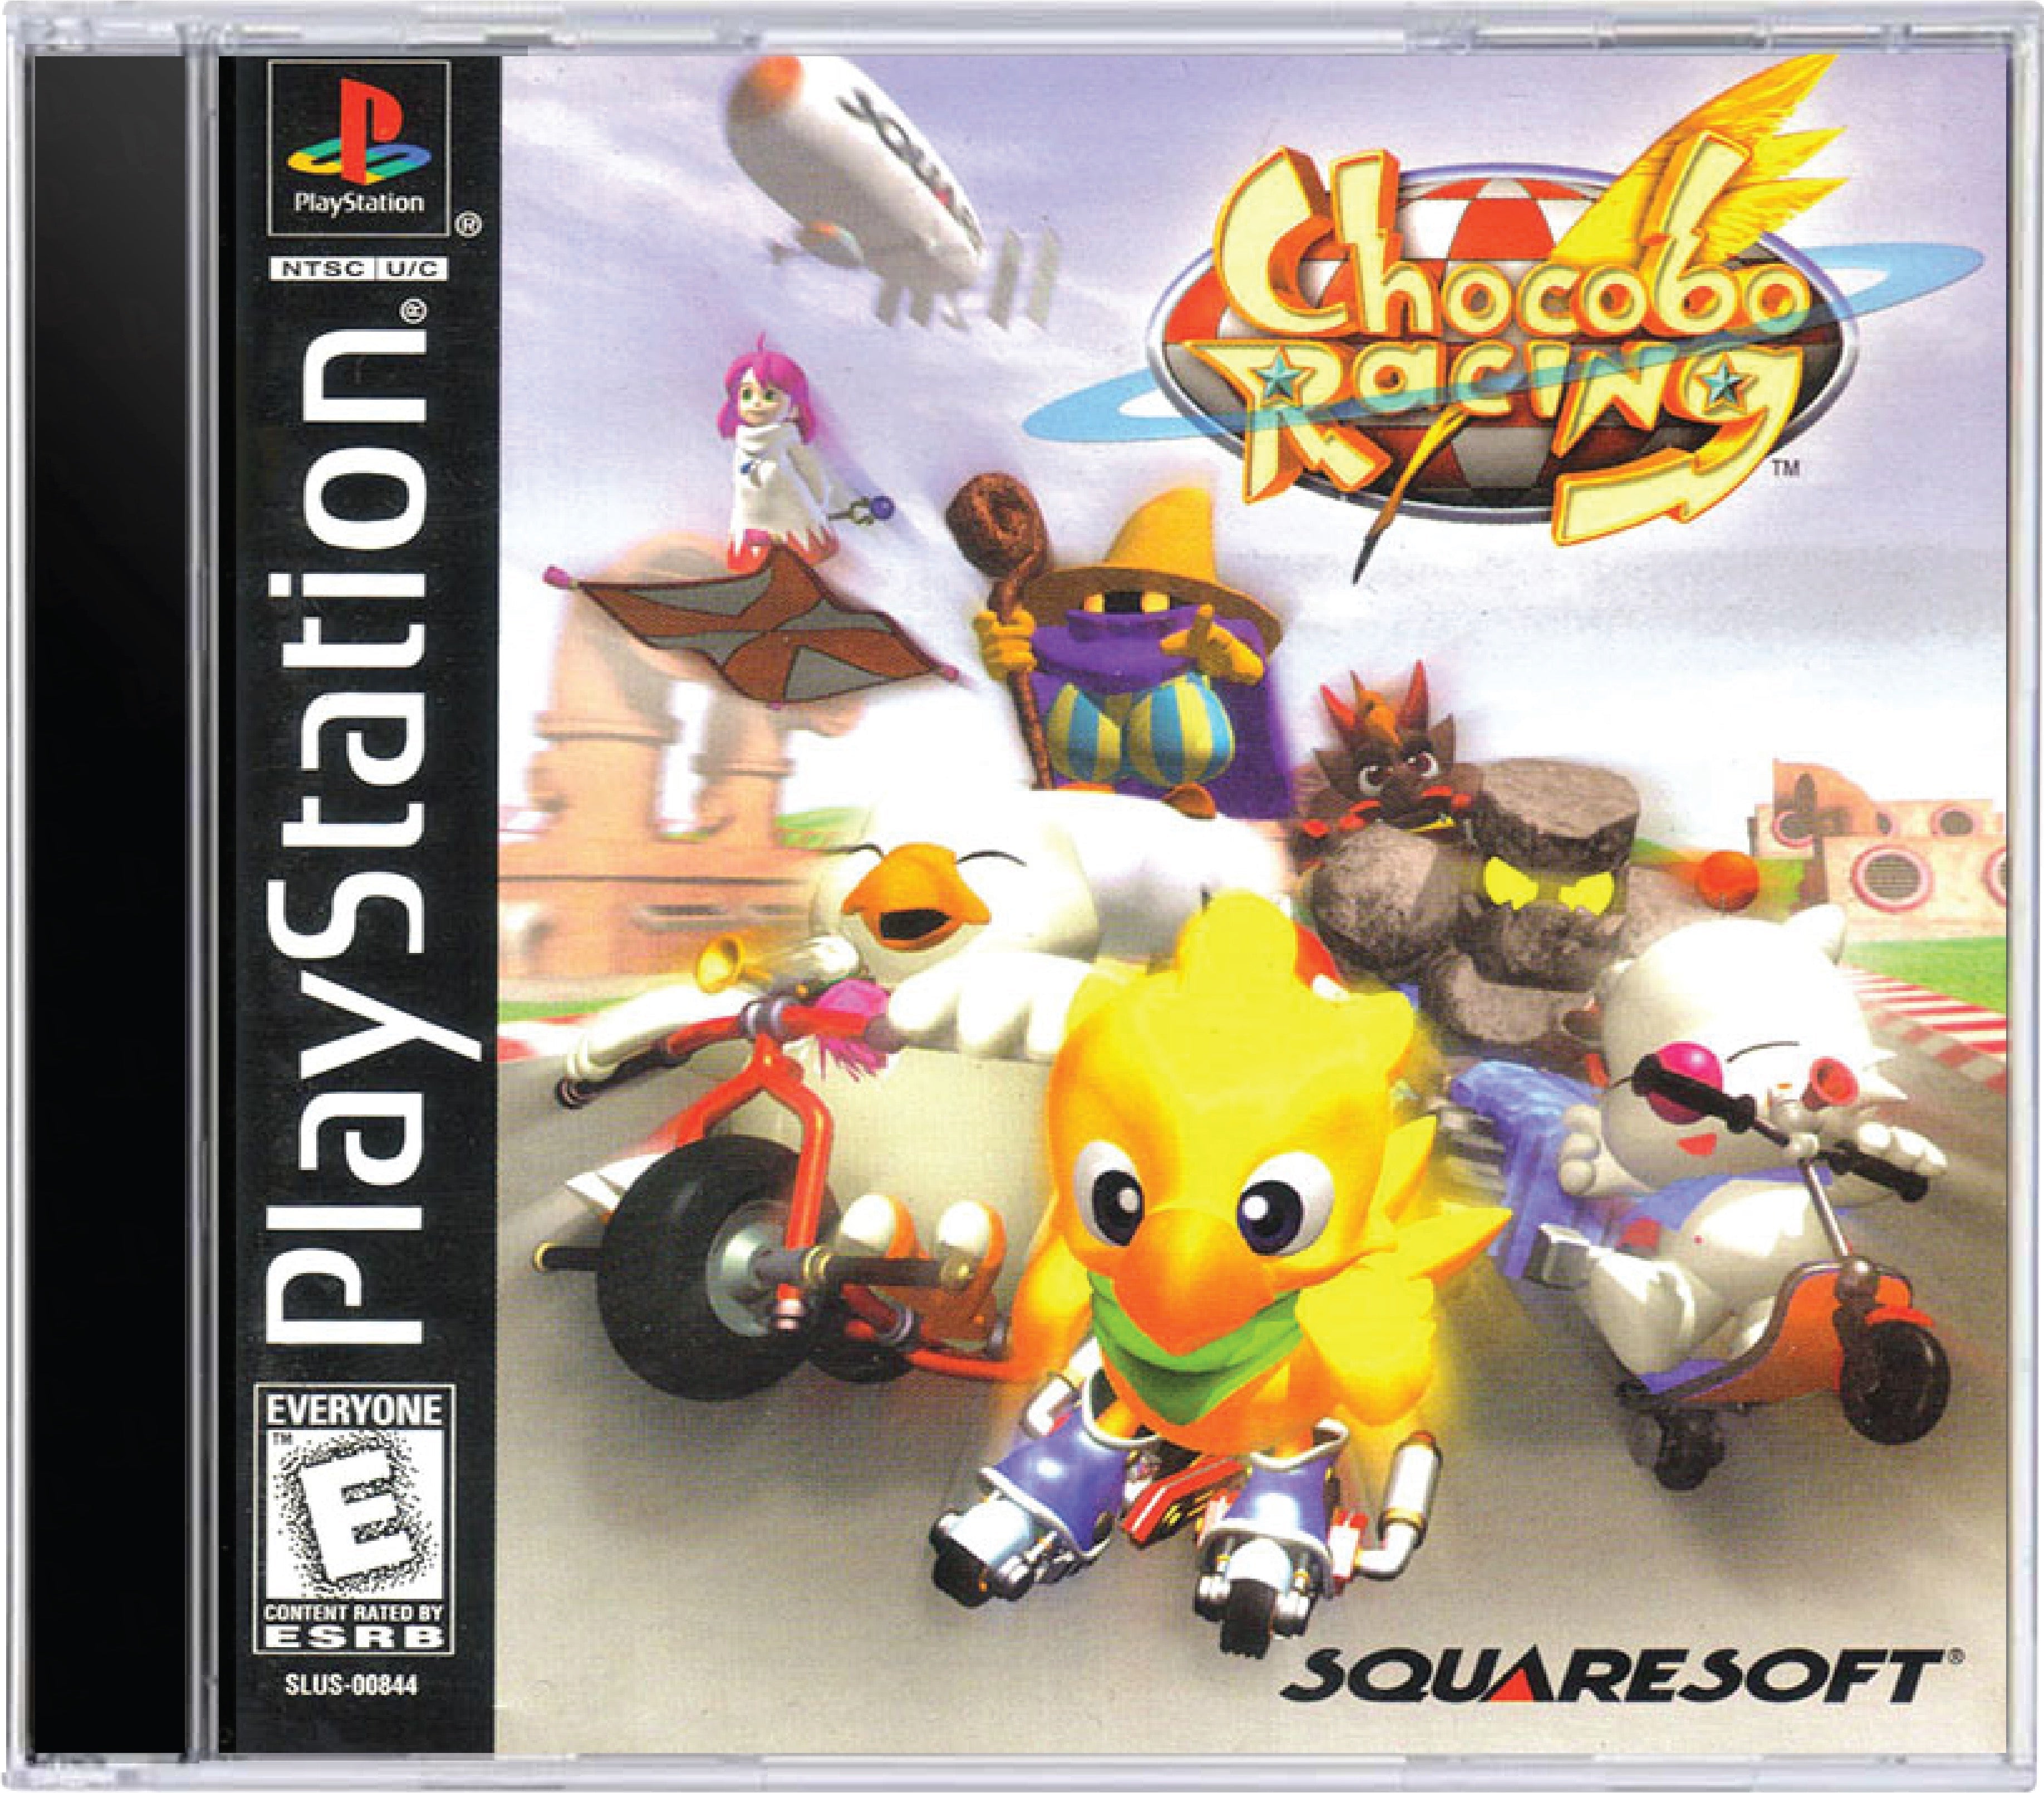 Chocobo Racing Cover Art and Product Photo